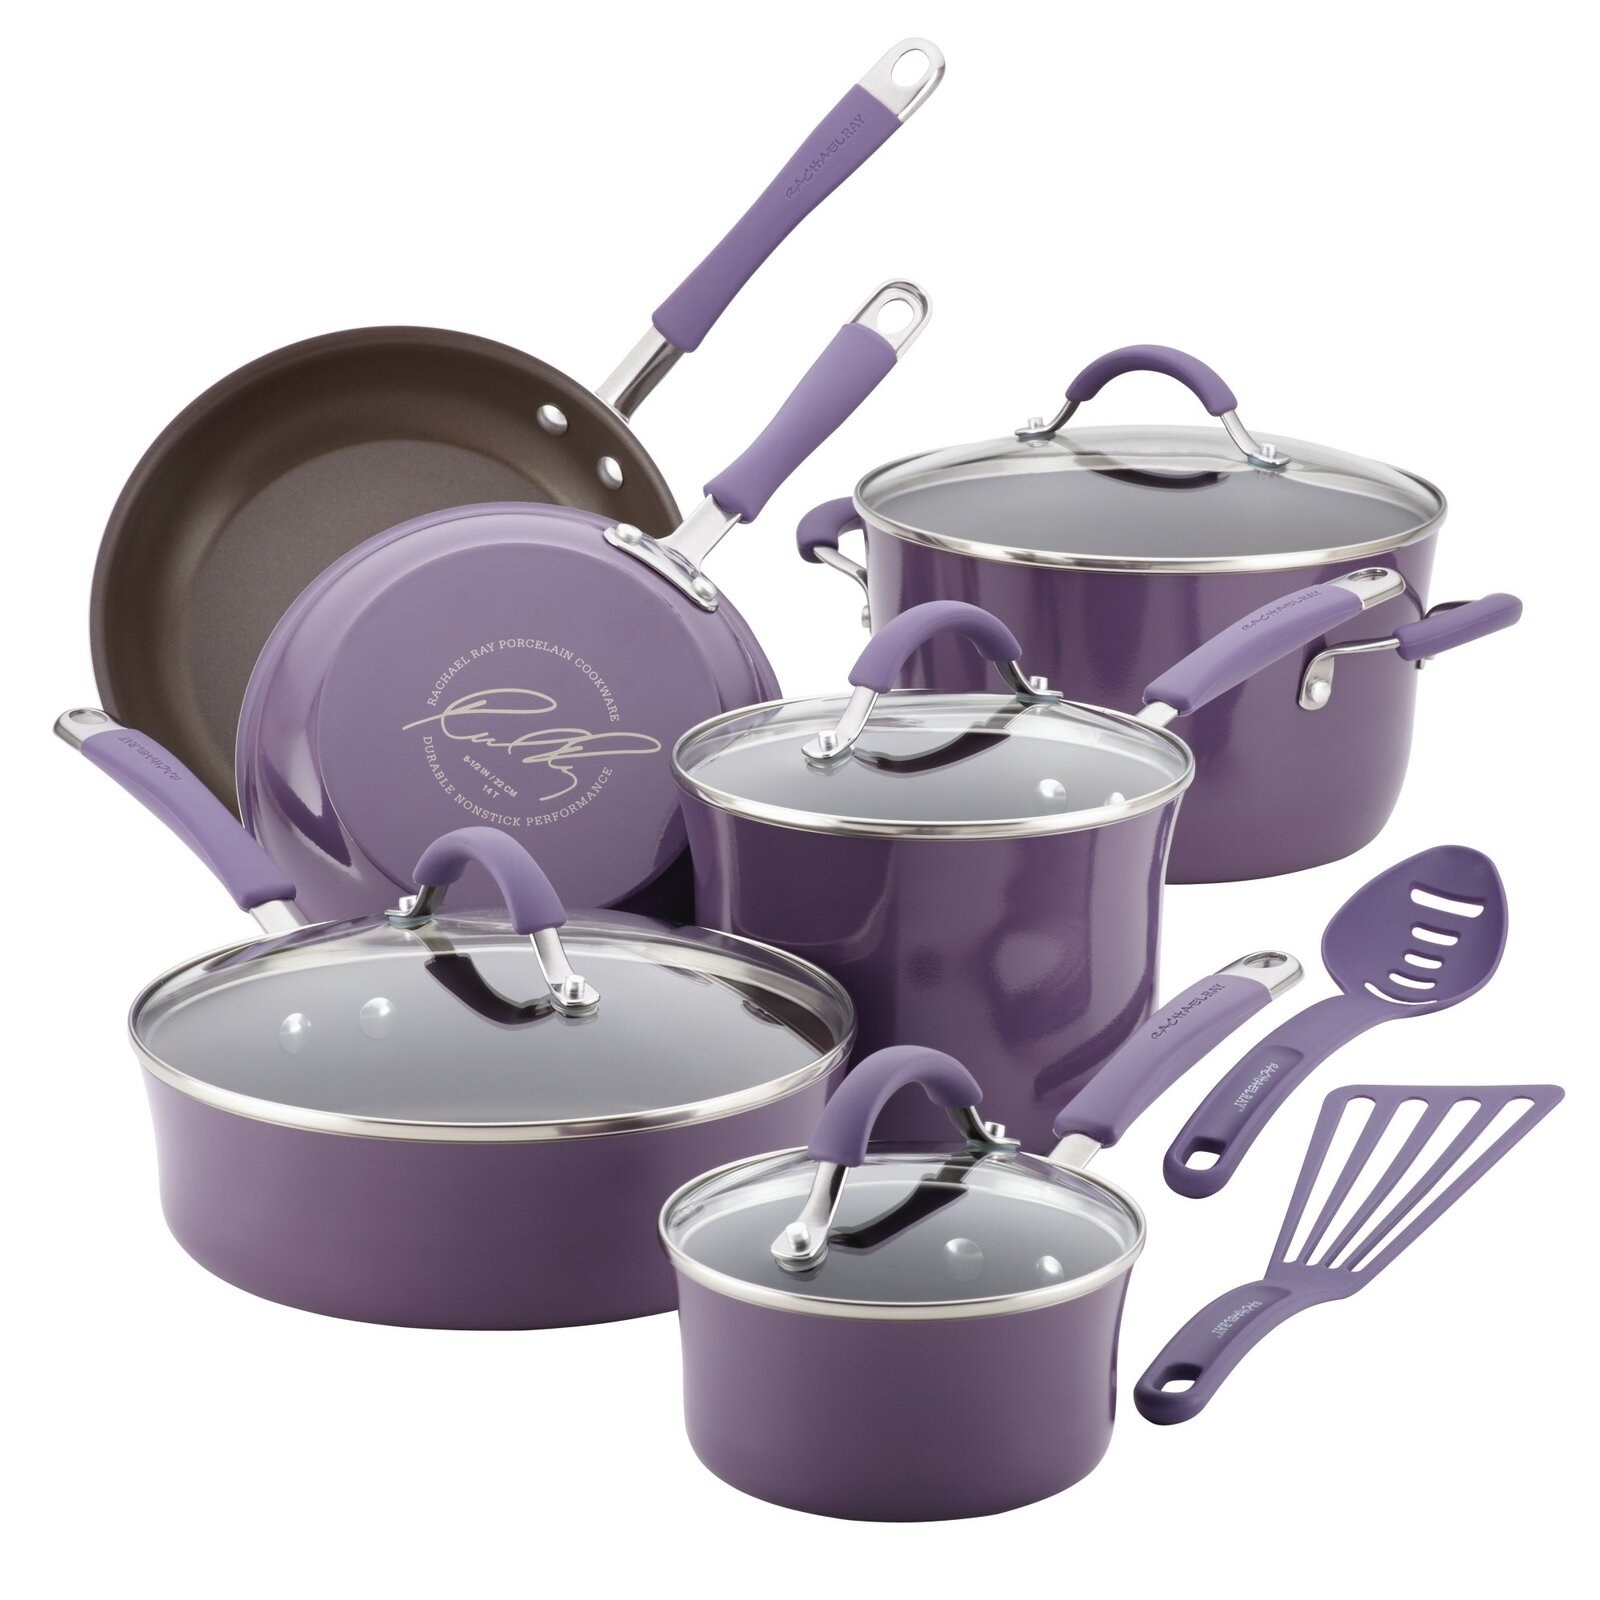 the set of pots and pans in purple